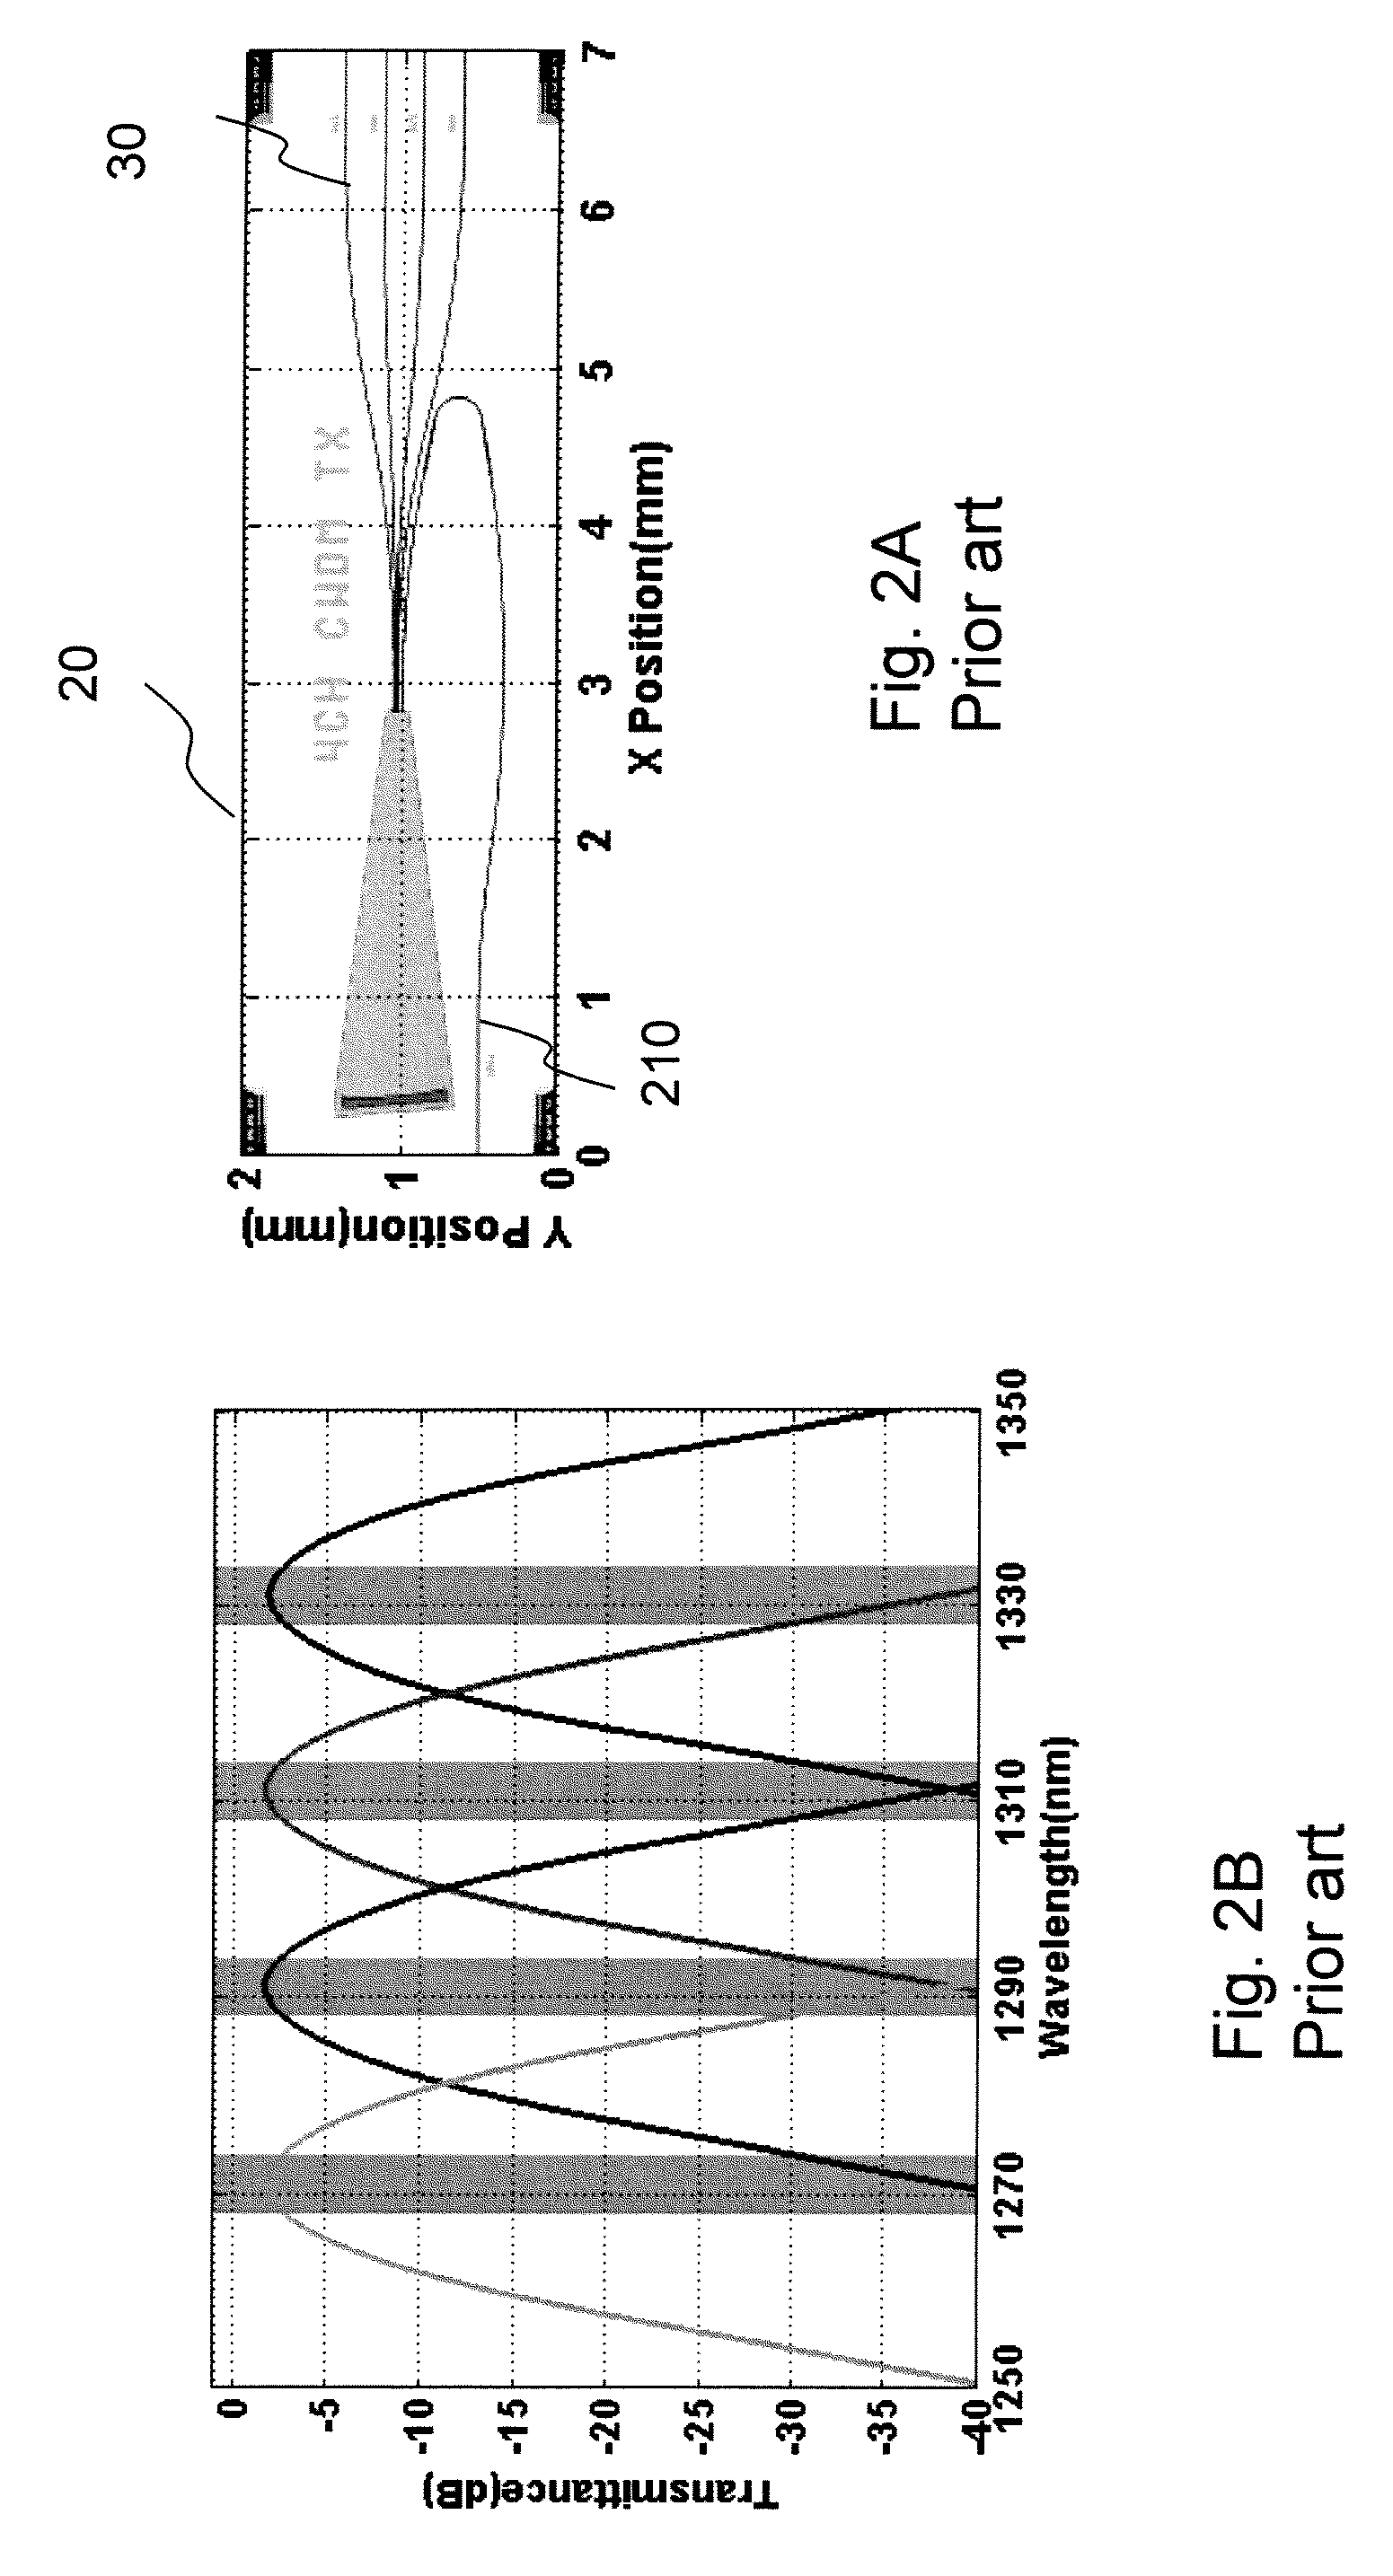 Micromechanically aligned optical assembly